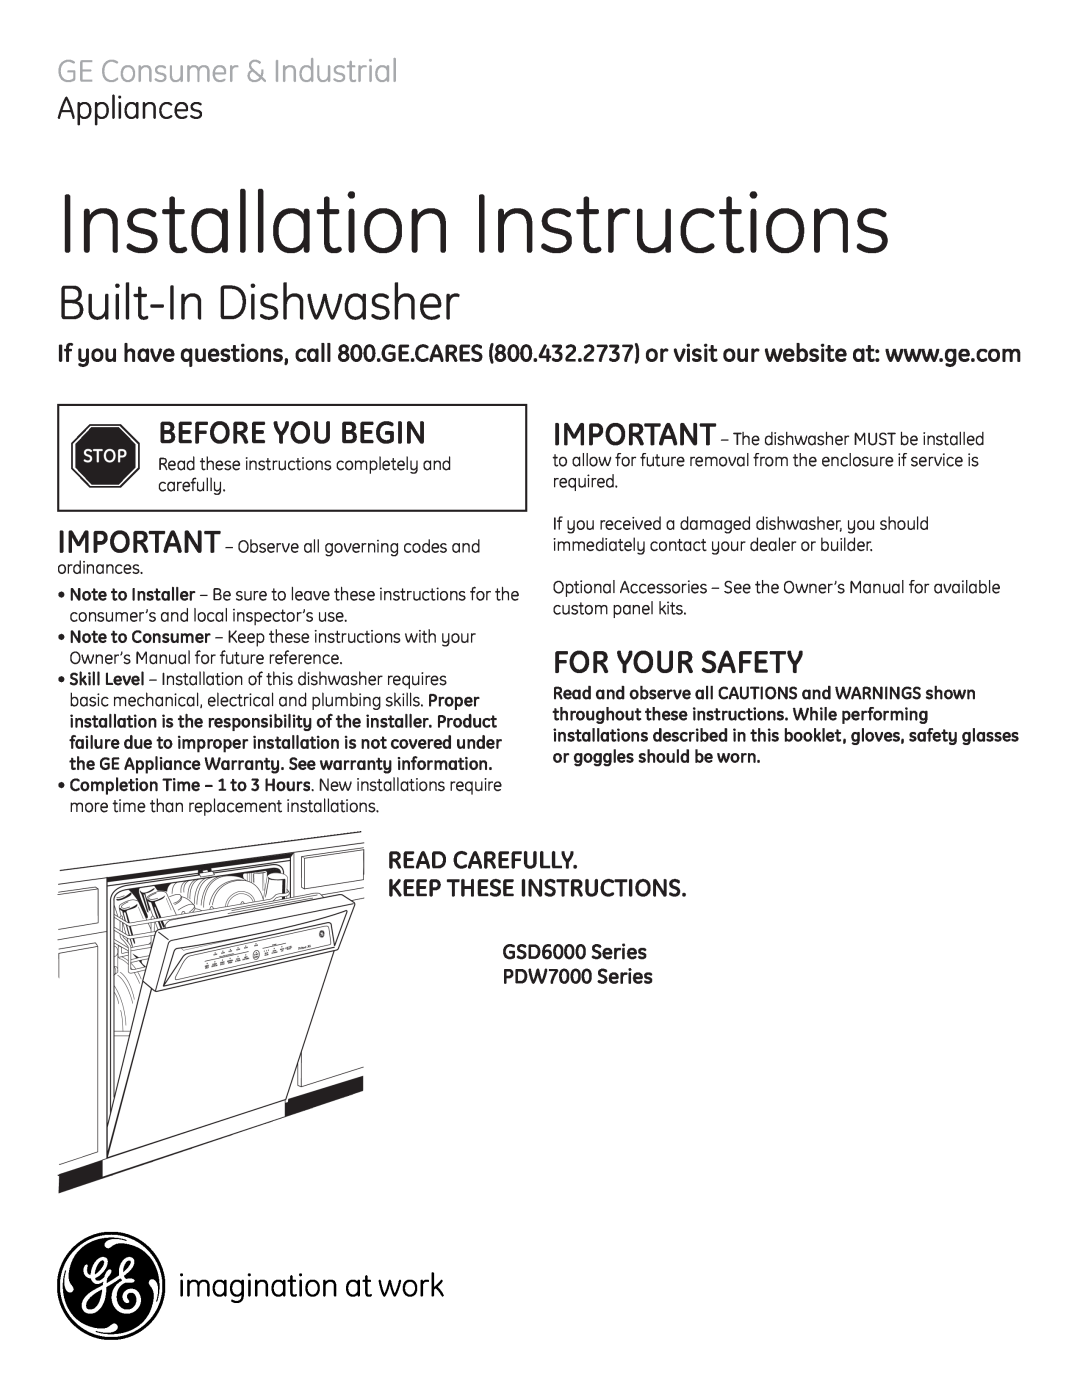 GE manual For Your Safety, Read Carefully Keep These Instructions, GSD6000 Series PDW7000 Series, Bu ilt-In Dishwasher 